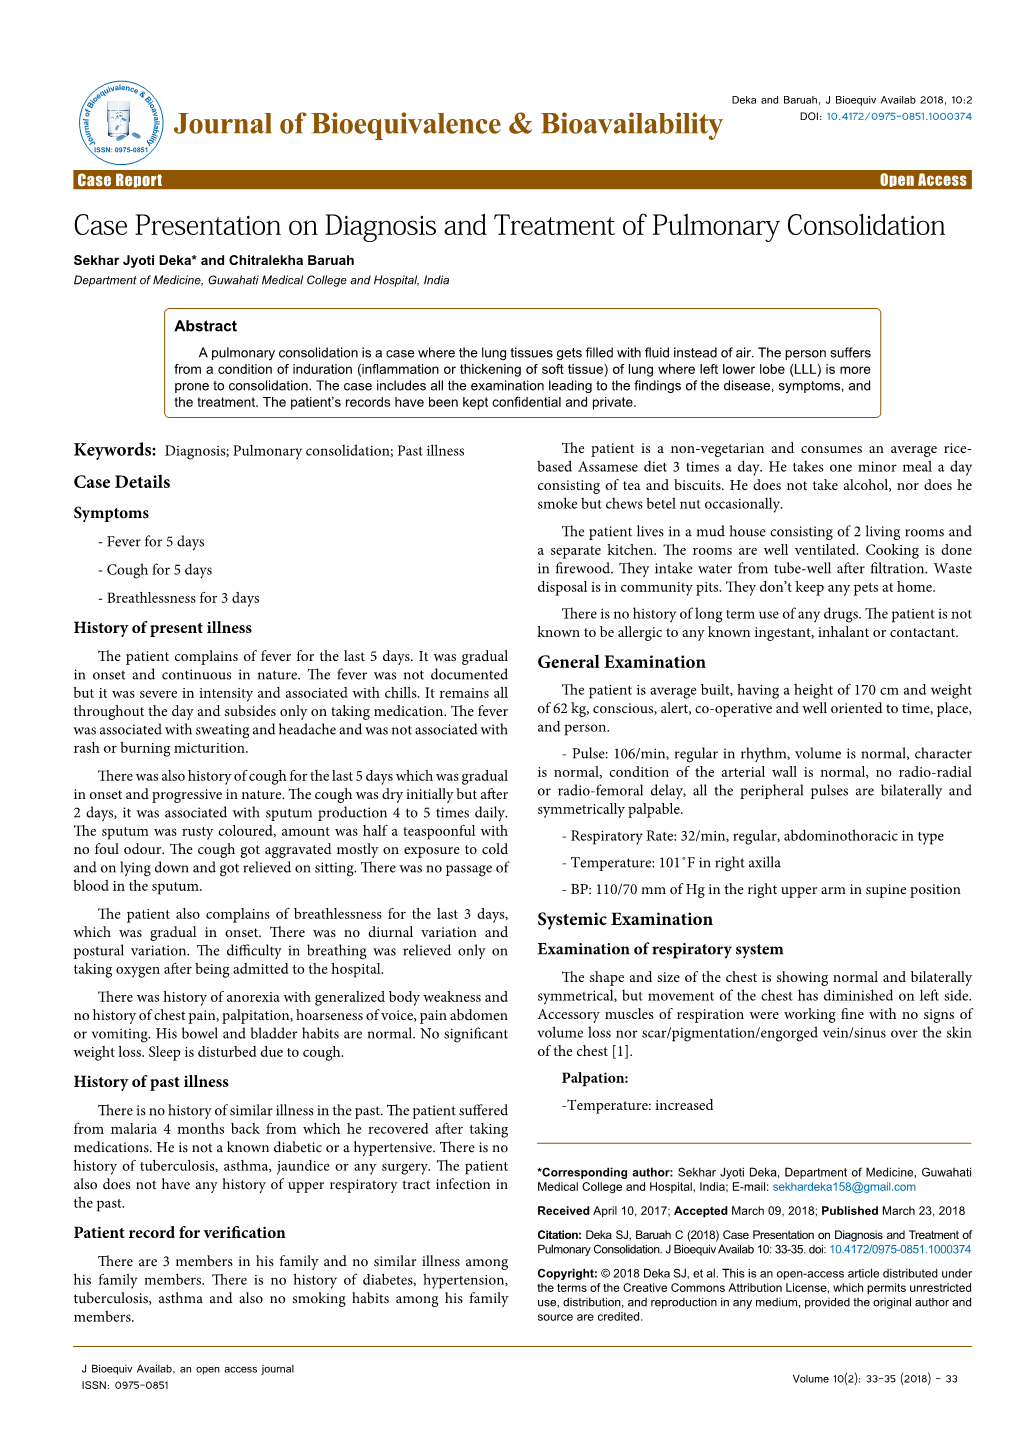 Case Presentation on Diagnosis and Treatment of Pulmonary Consolidation